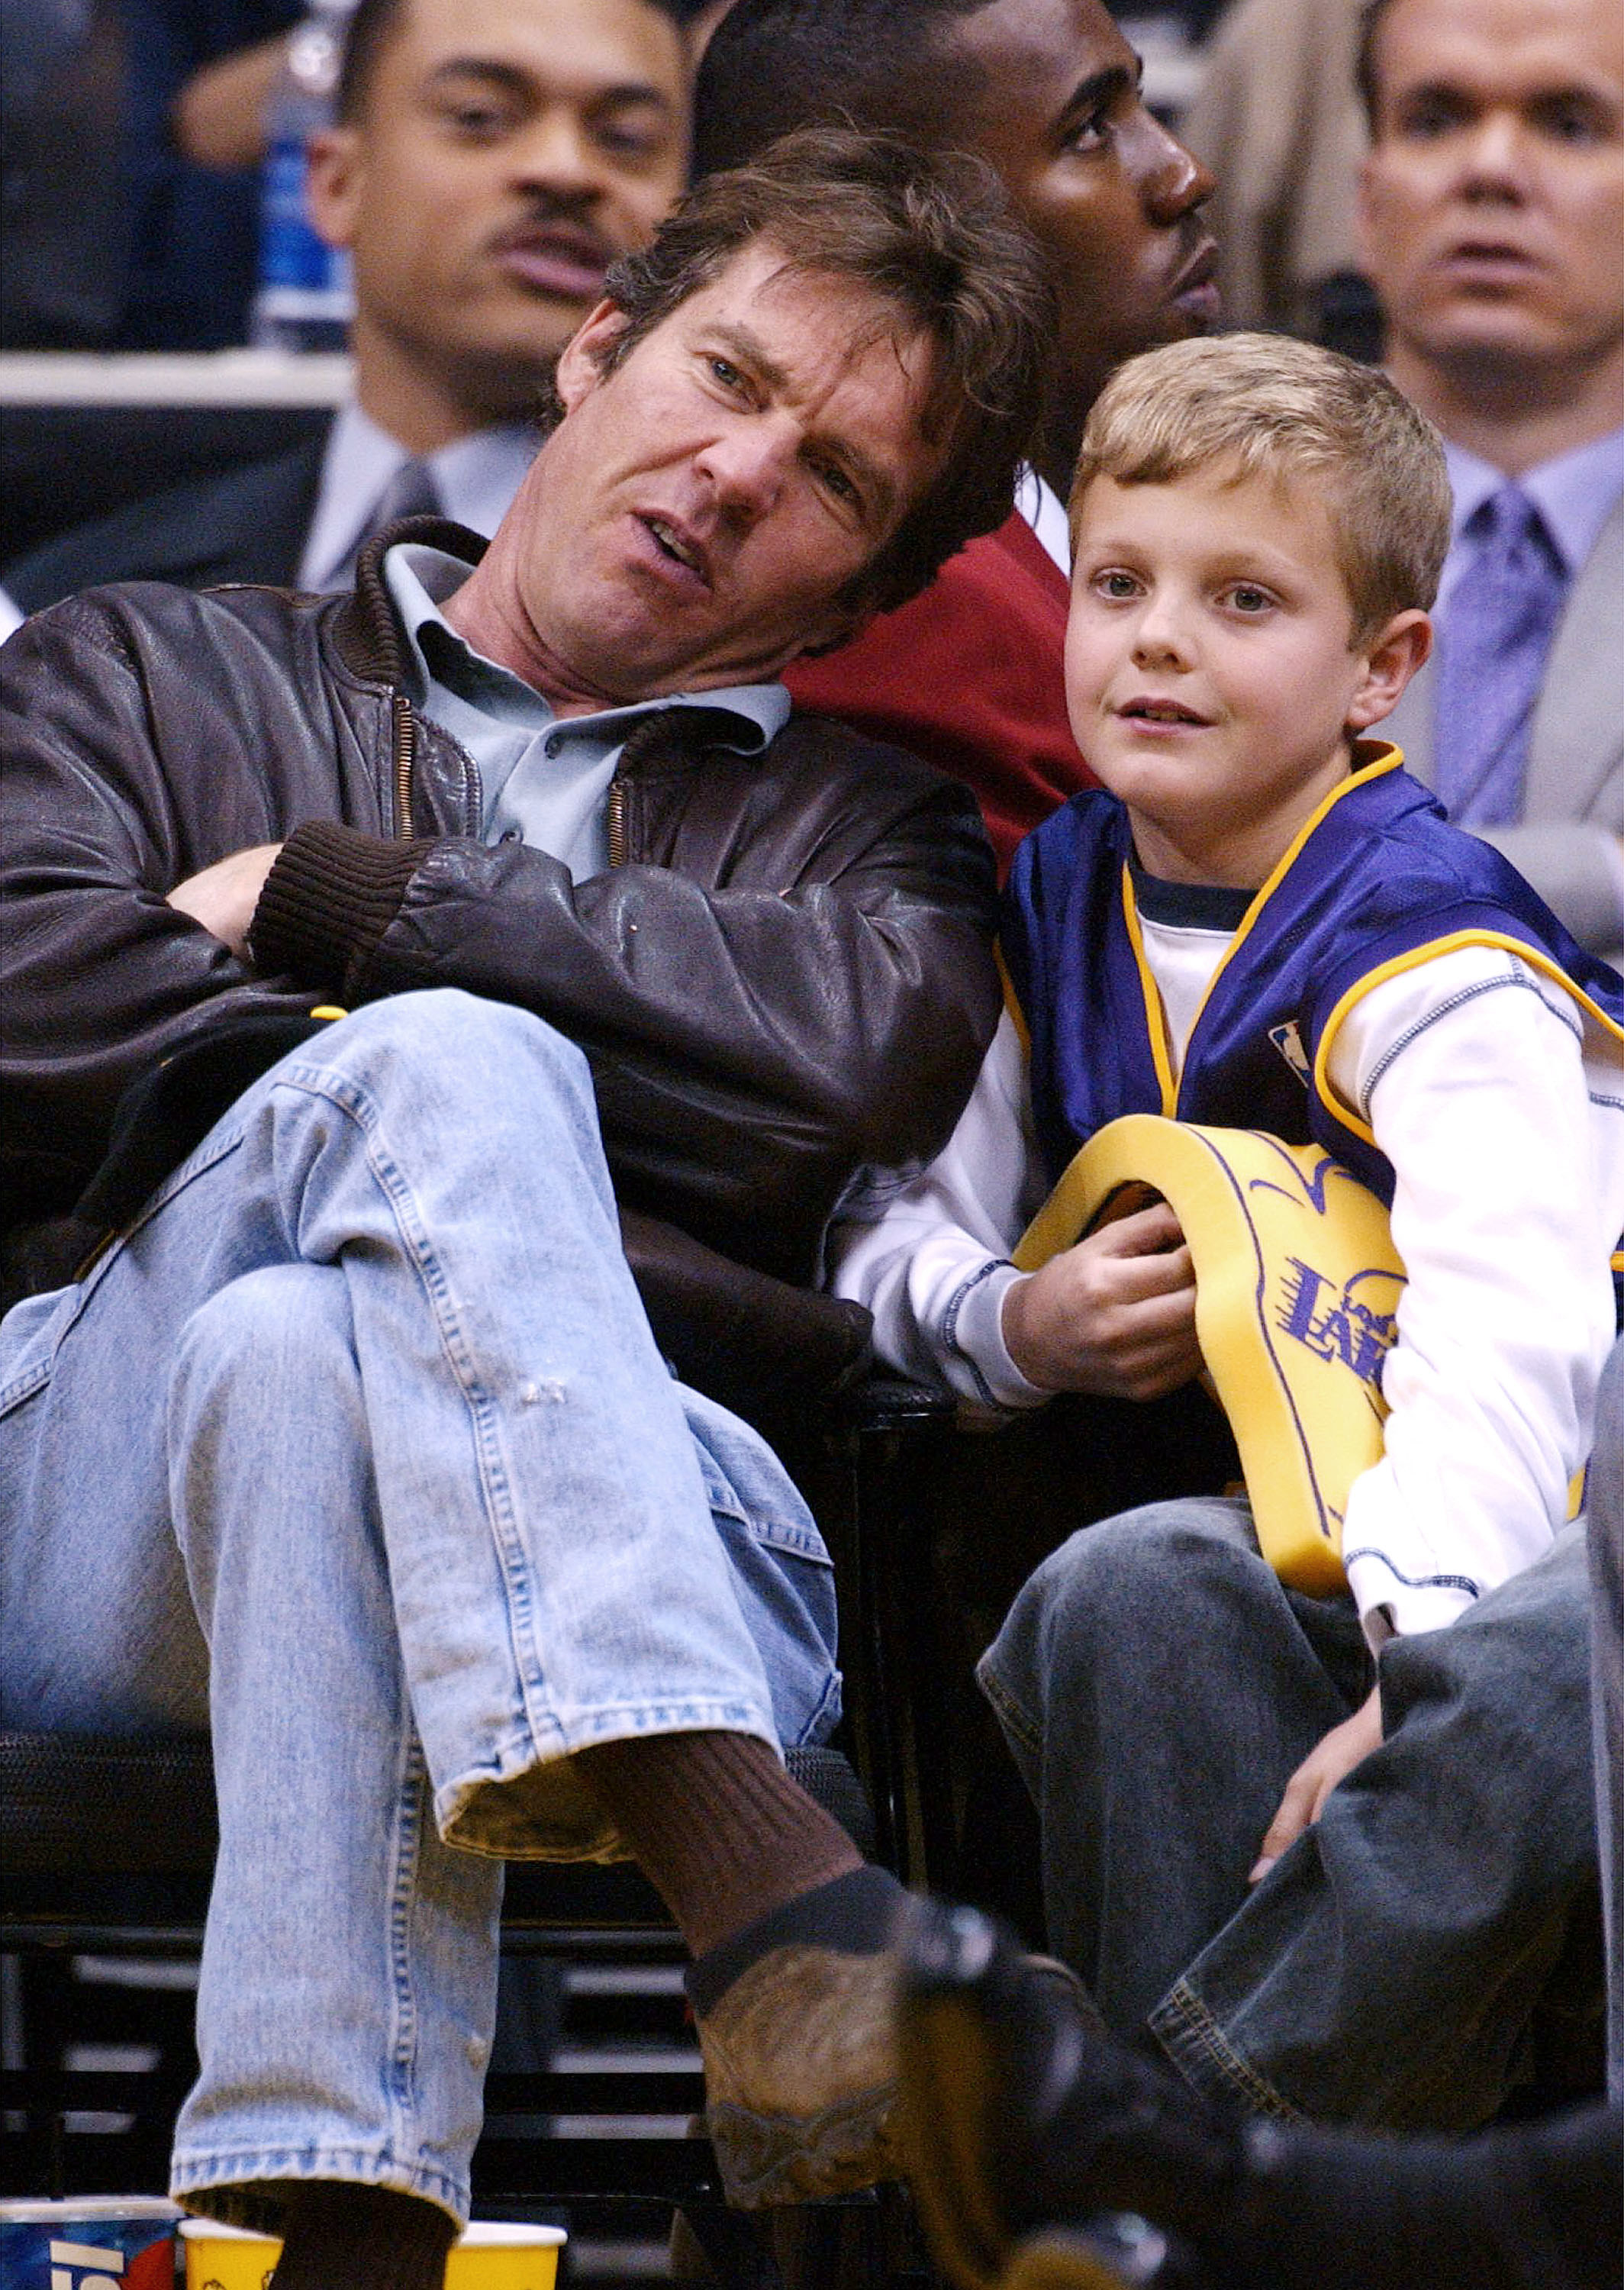 jack sitting next to his dad at a game